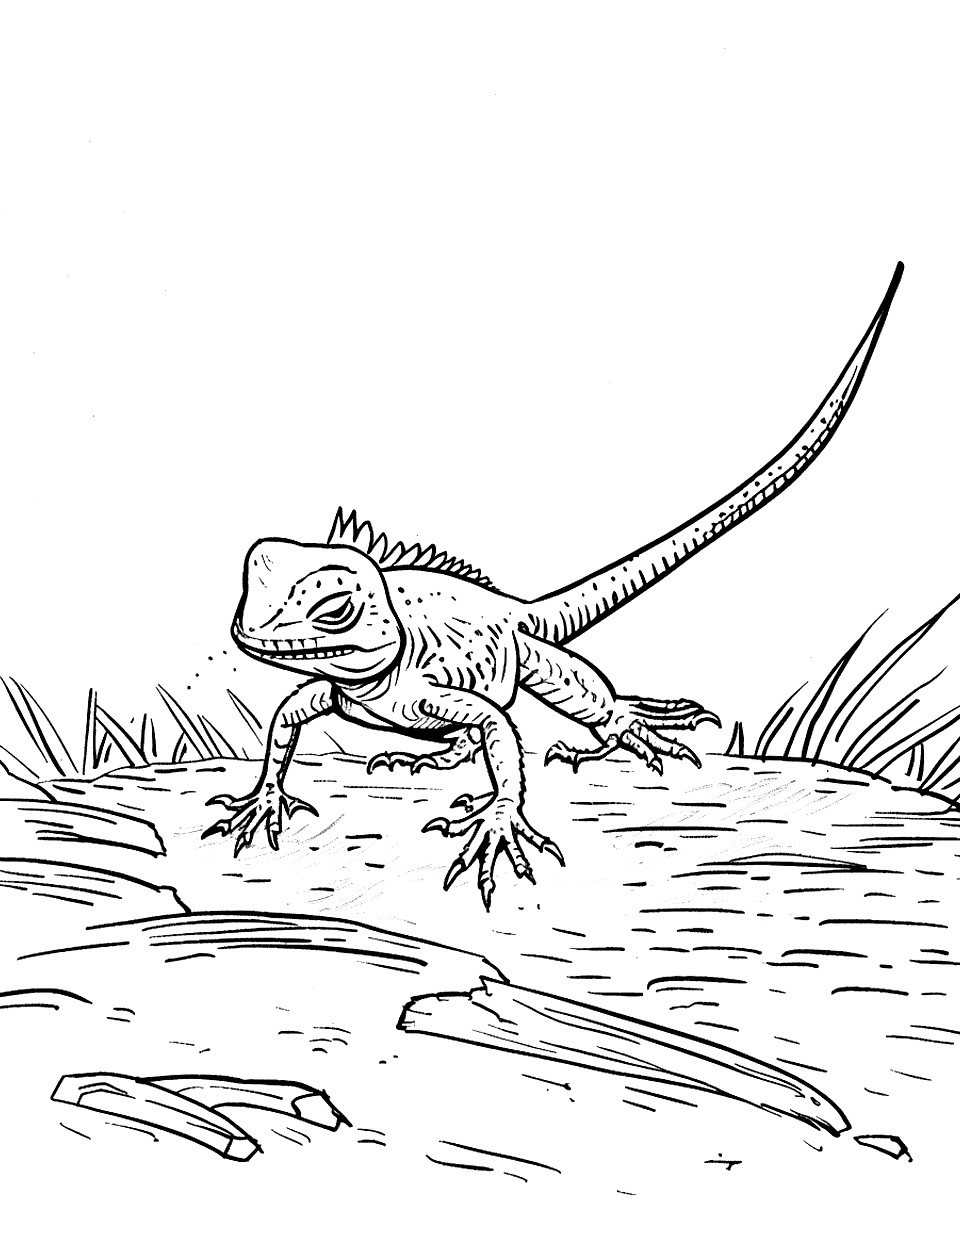 Lizard Racing Insect Coloring Page - A lizard racing across the ground for its destination.